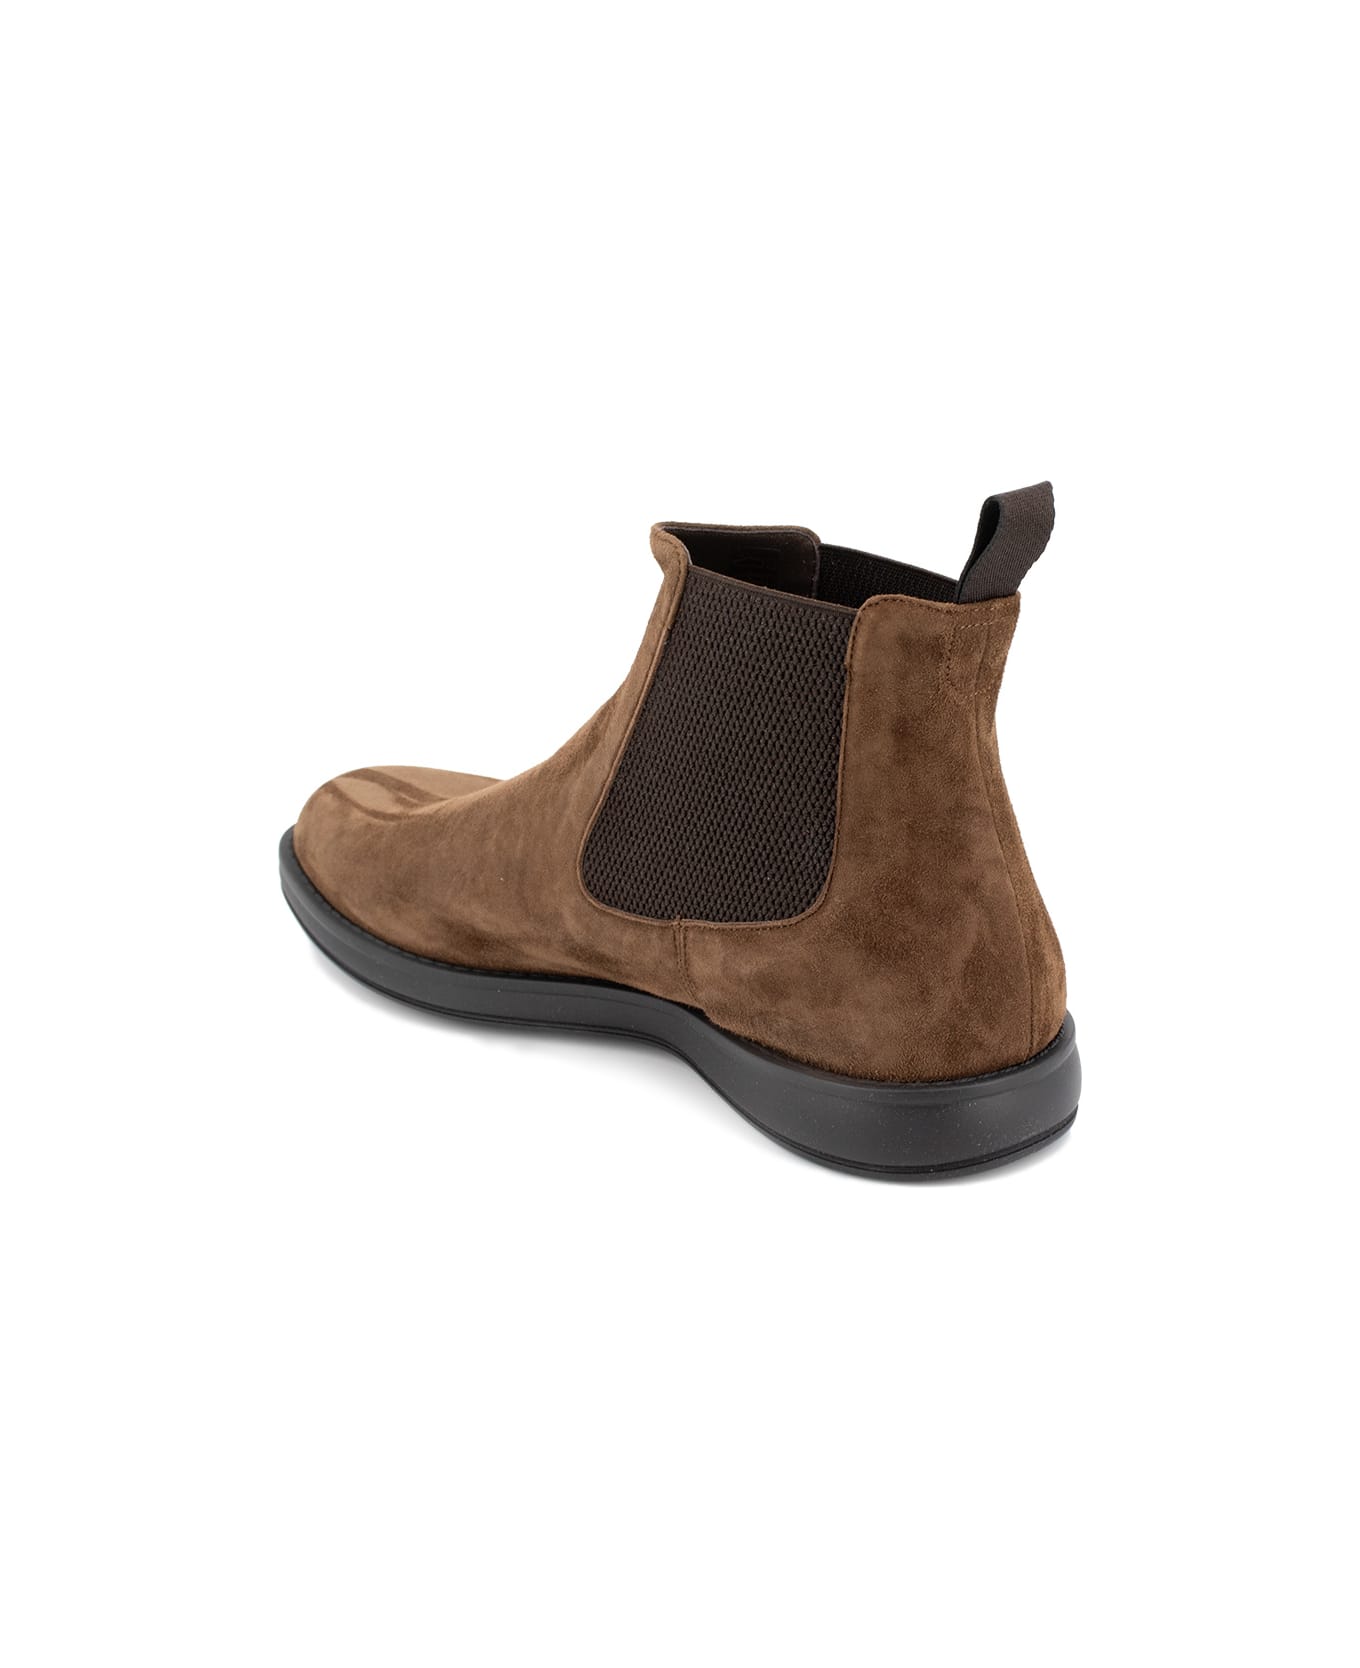 Brioni Ankle Boots - BROWN